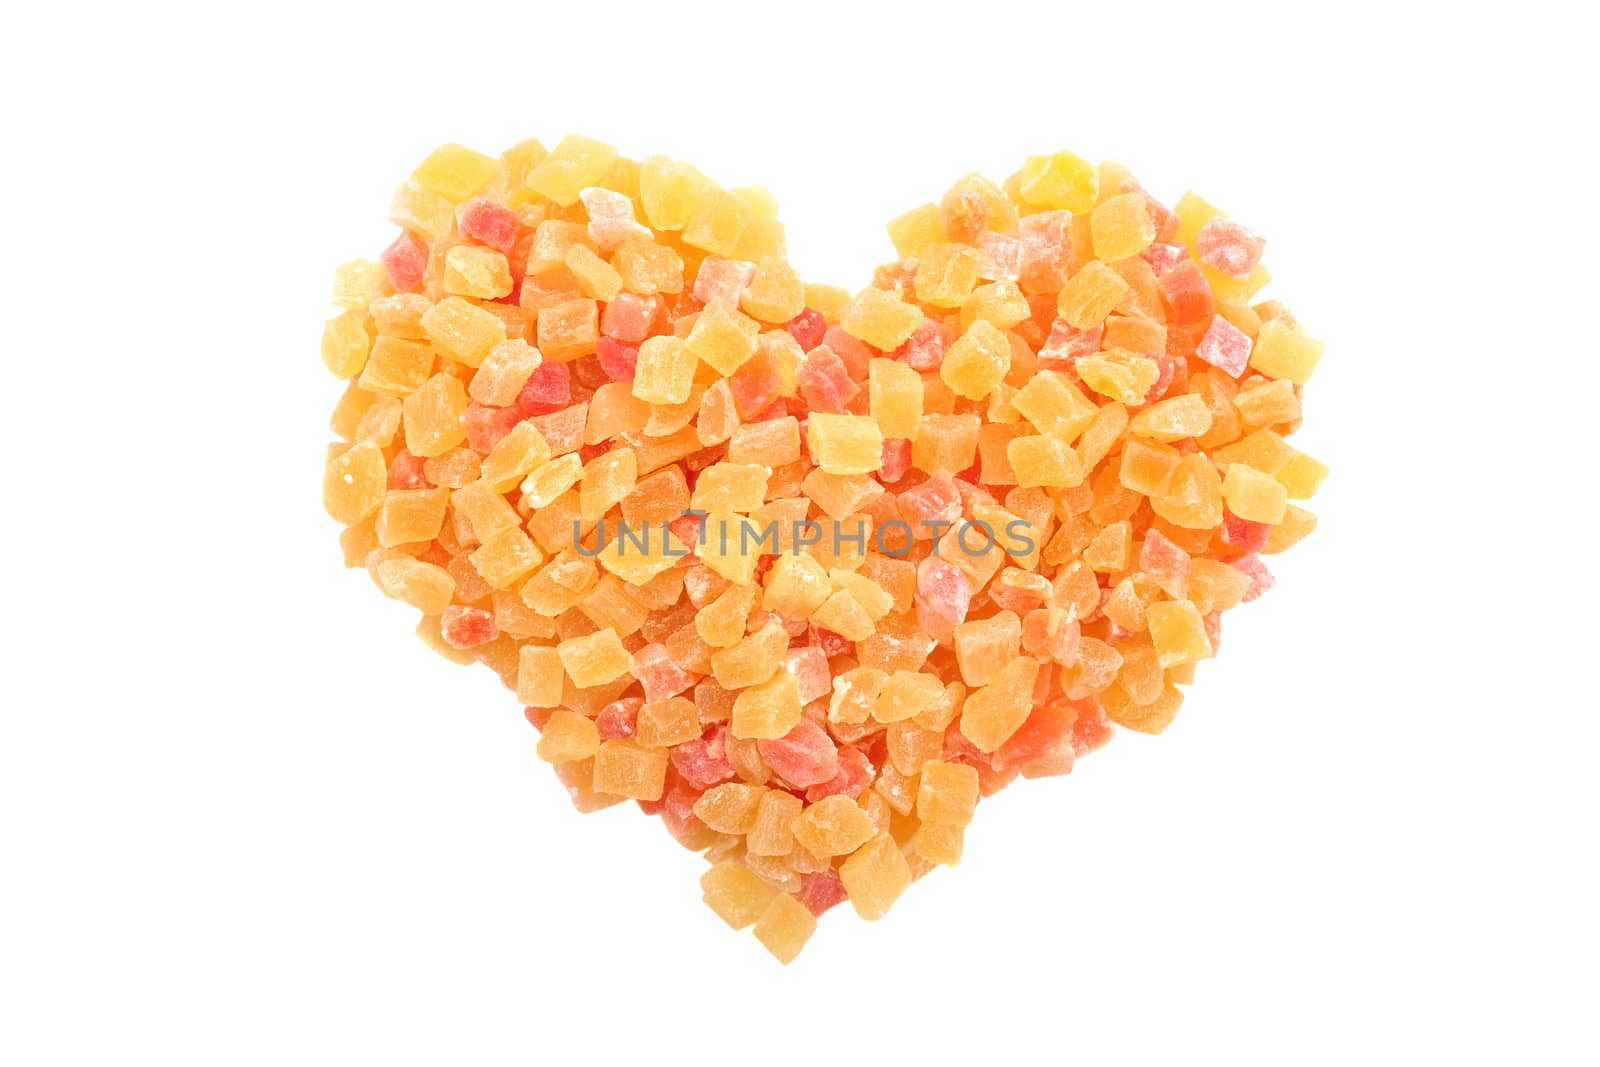 Dried pineapple and papaya in a heart shape, isolated on a white background